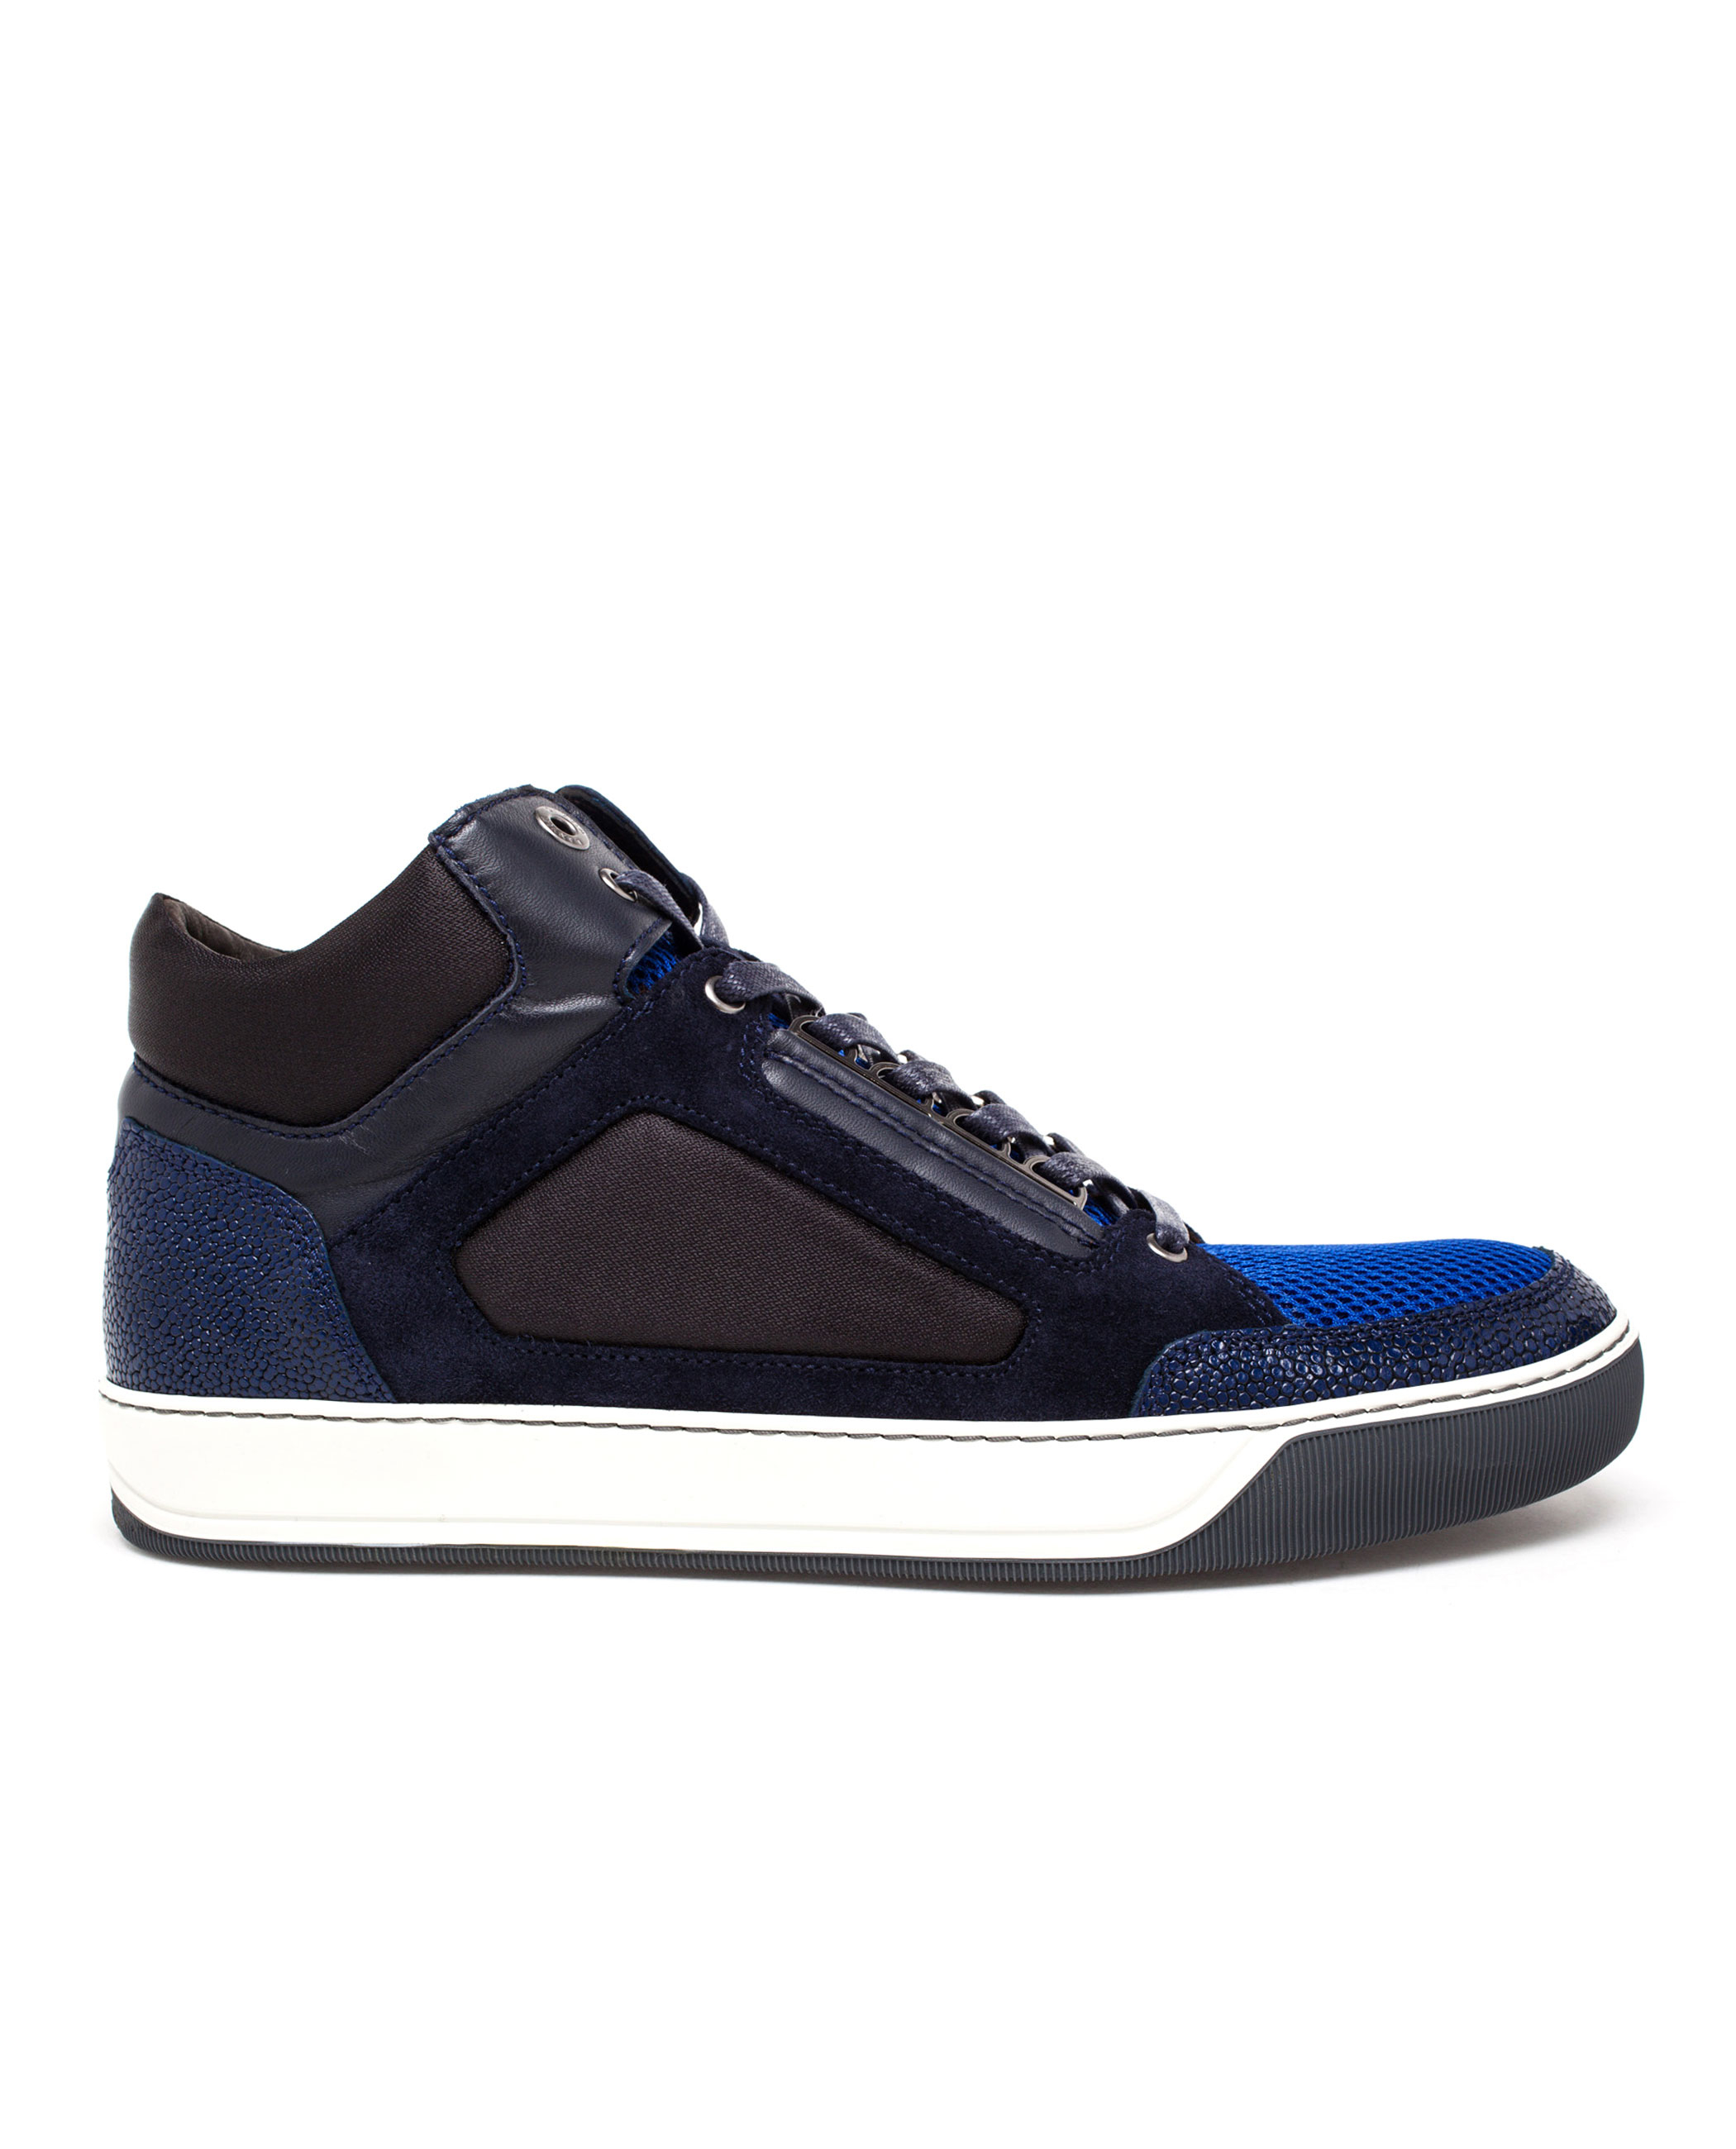 Lyst - Lanvin Suede And Leather Sneakers in Blue